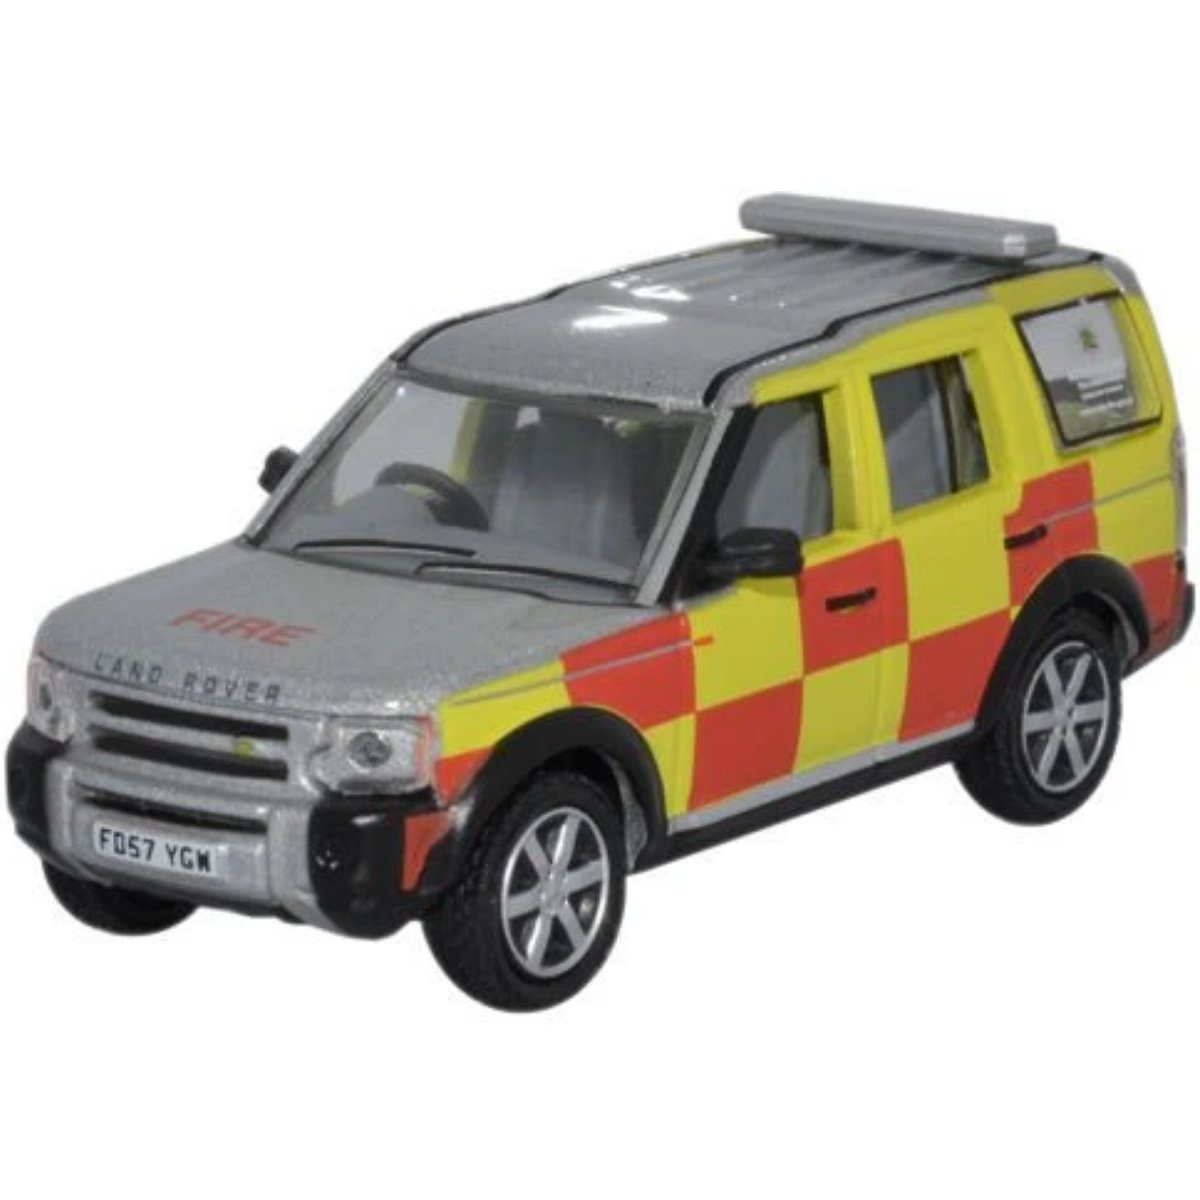 Oxford Diecast 76LRD005 Nottinghamshire Fire & Rescue Land Rover Discovery - Phillips Hobbies